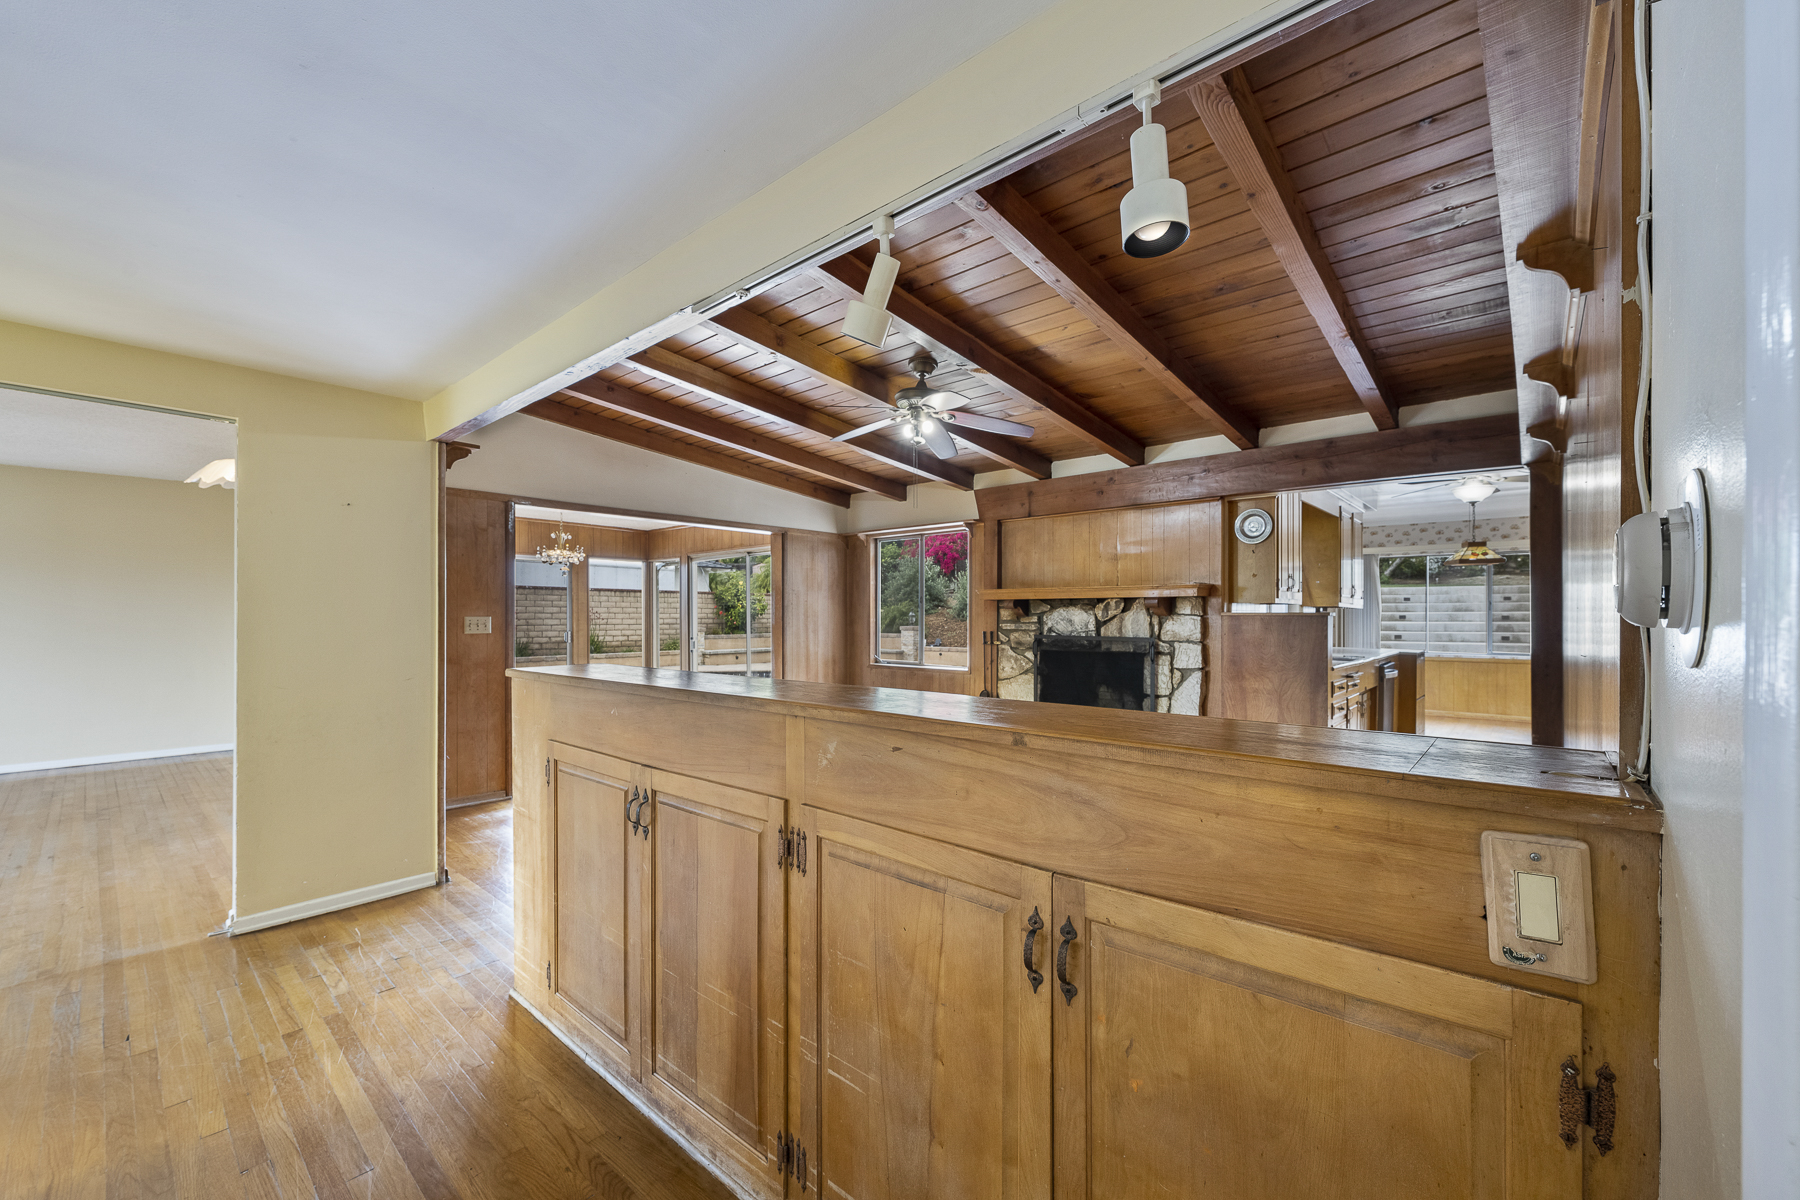 501 Dorothy Drive: kitchen view into living room with slight vaulted ceilings